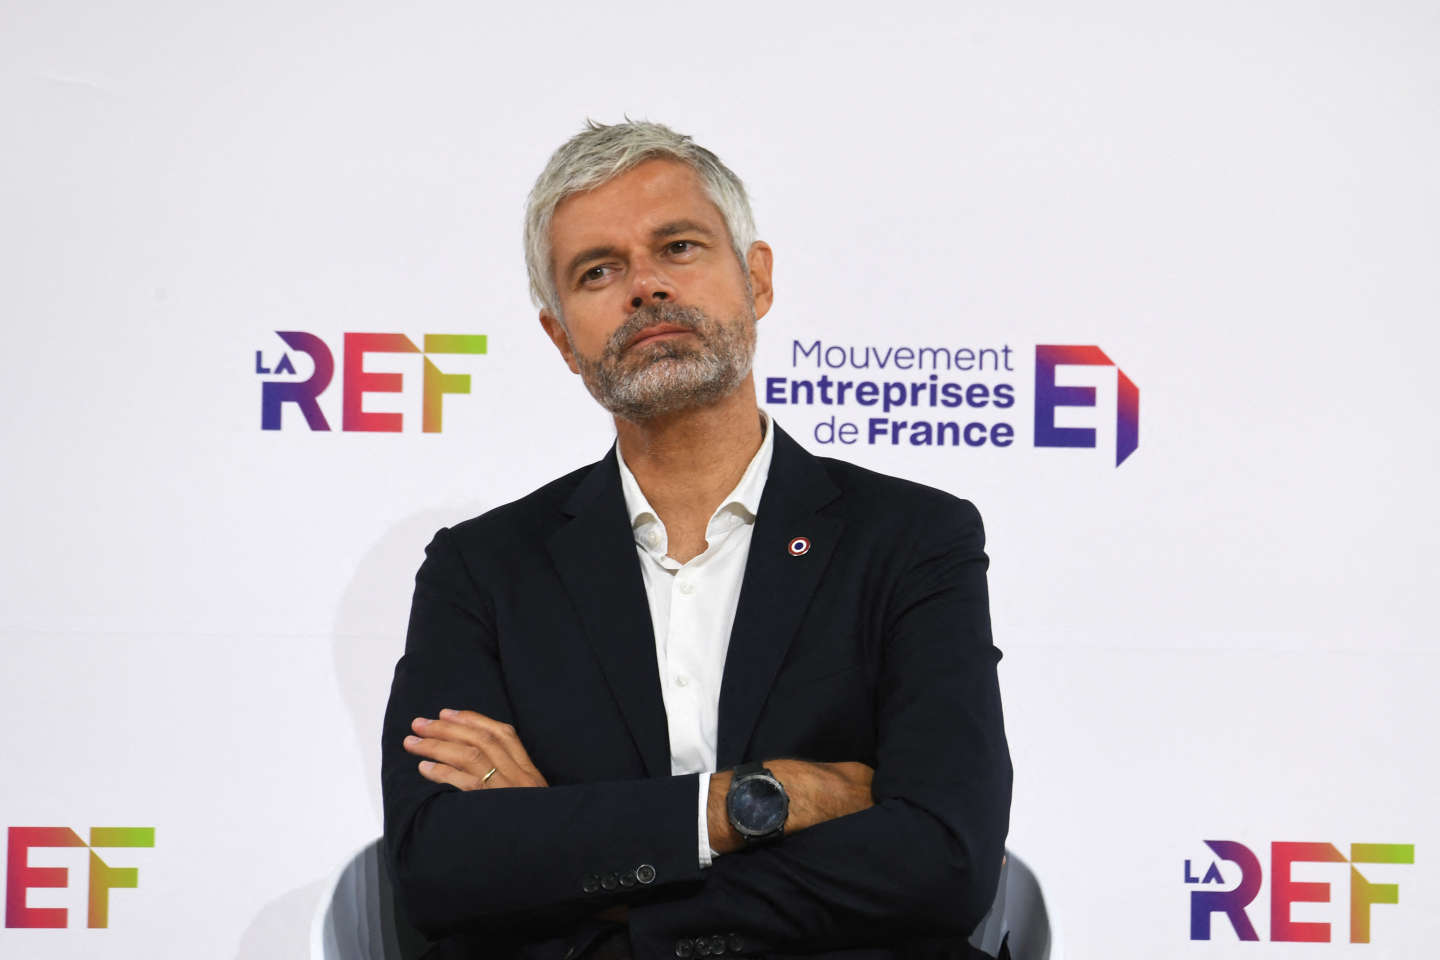 Laurent Wauquiez, attacked on the drop in cultural aid in Auvergne-Rhône-Alpes, denounces a “two-speed culture”